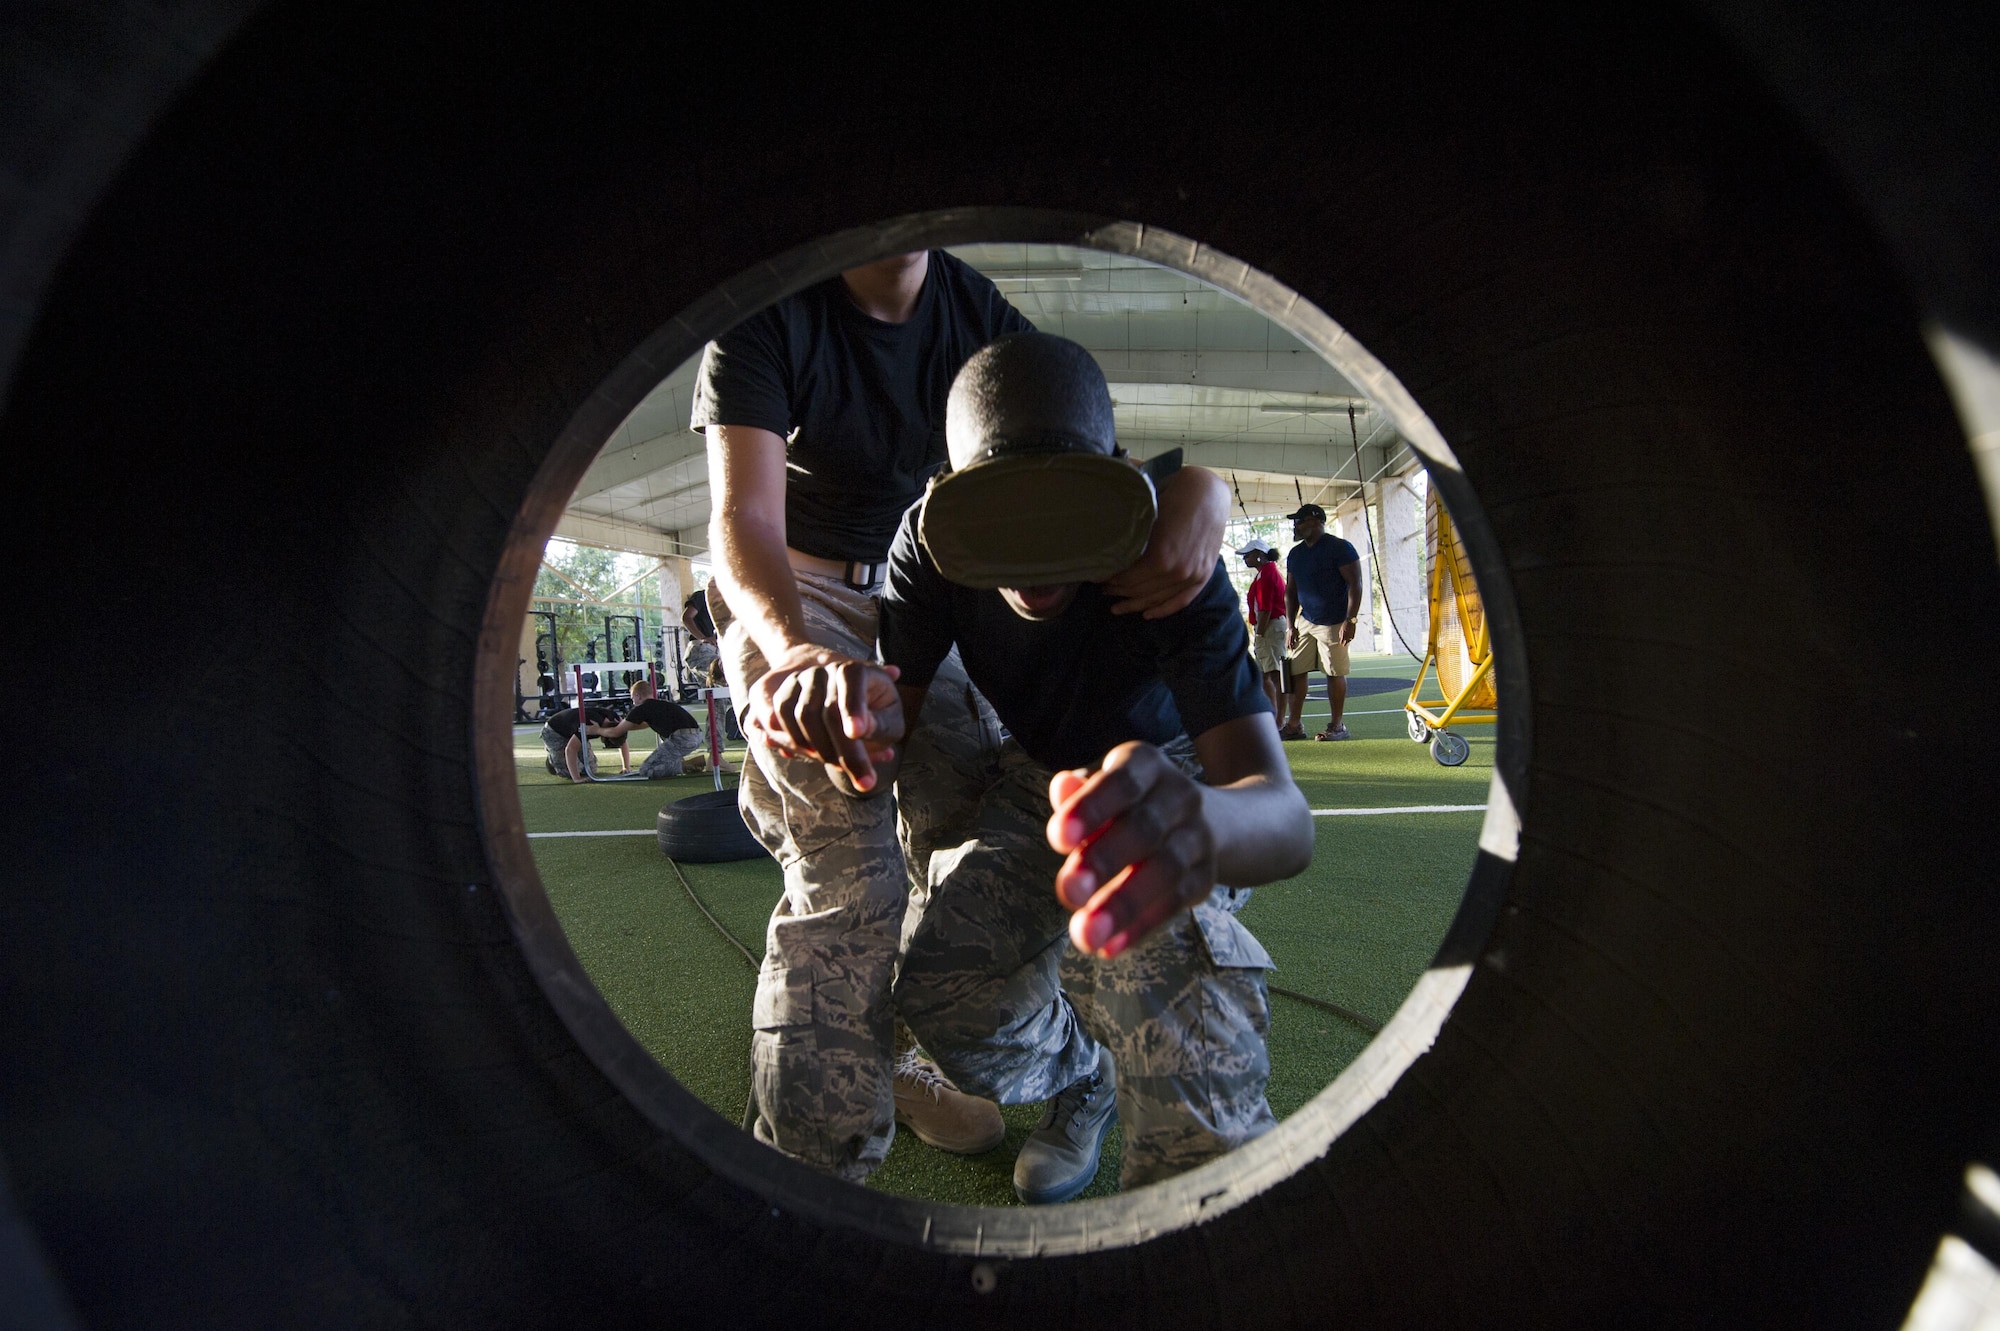 A blindfolded Junior ROTC cadet is guided through a tire at the end of an obstacle course at the Special Tactics Training Squadron, Hurlburt Field, Fla., June 26, 2017. Cadets had to maneuver through a tightly-constricted obstacle course while guiding blindfolded wingmen and carrying a variety of heavy objects, including weights and a training dummy on a stretcher. (U.S. Air Force photo by Staff Sgt. Victor J. Caputo)